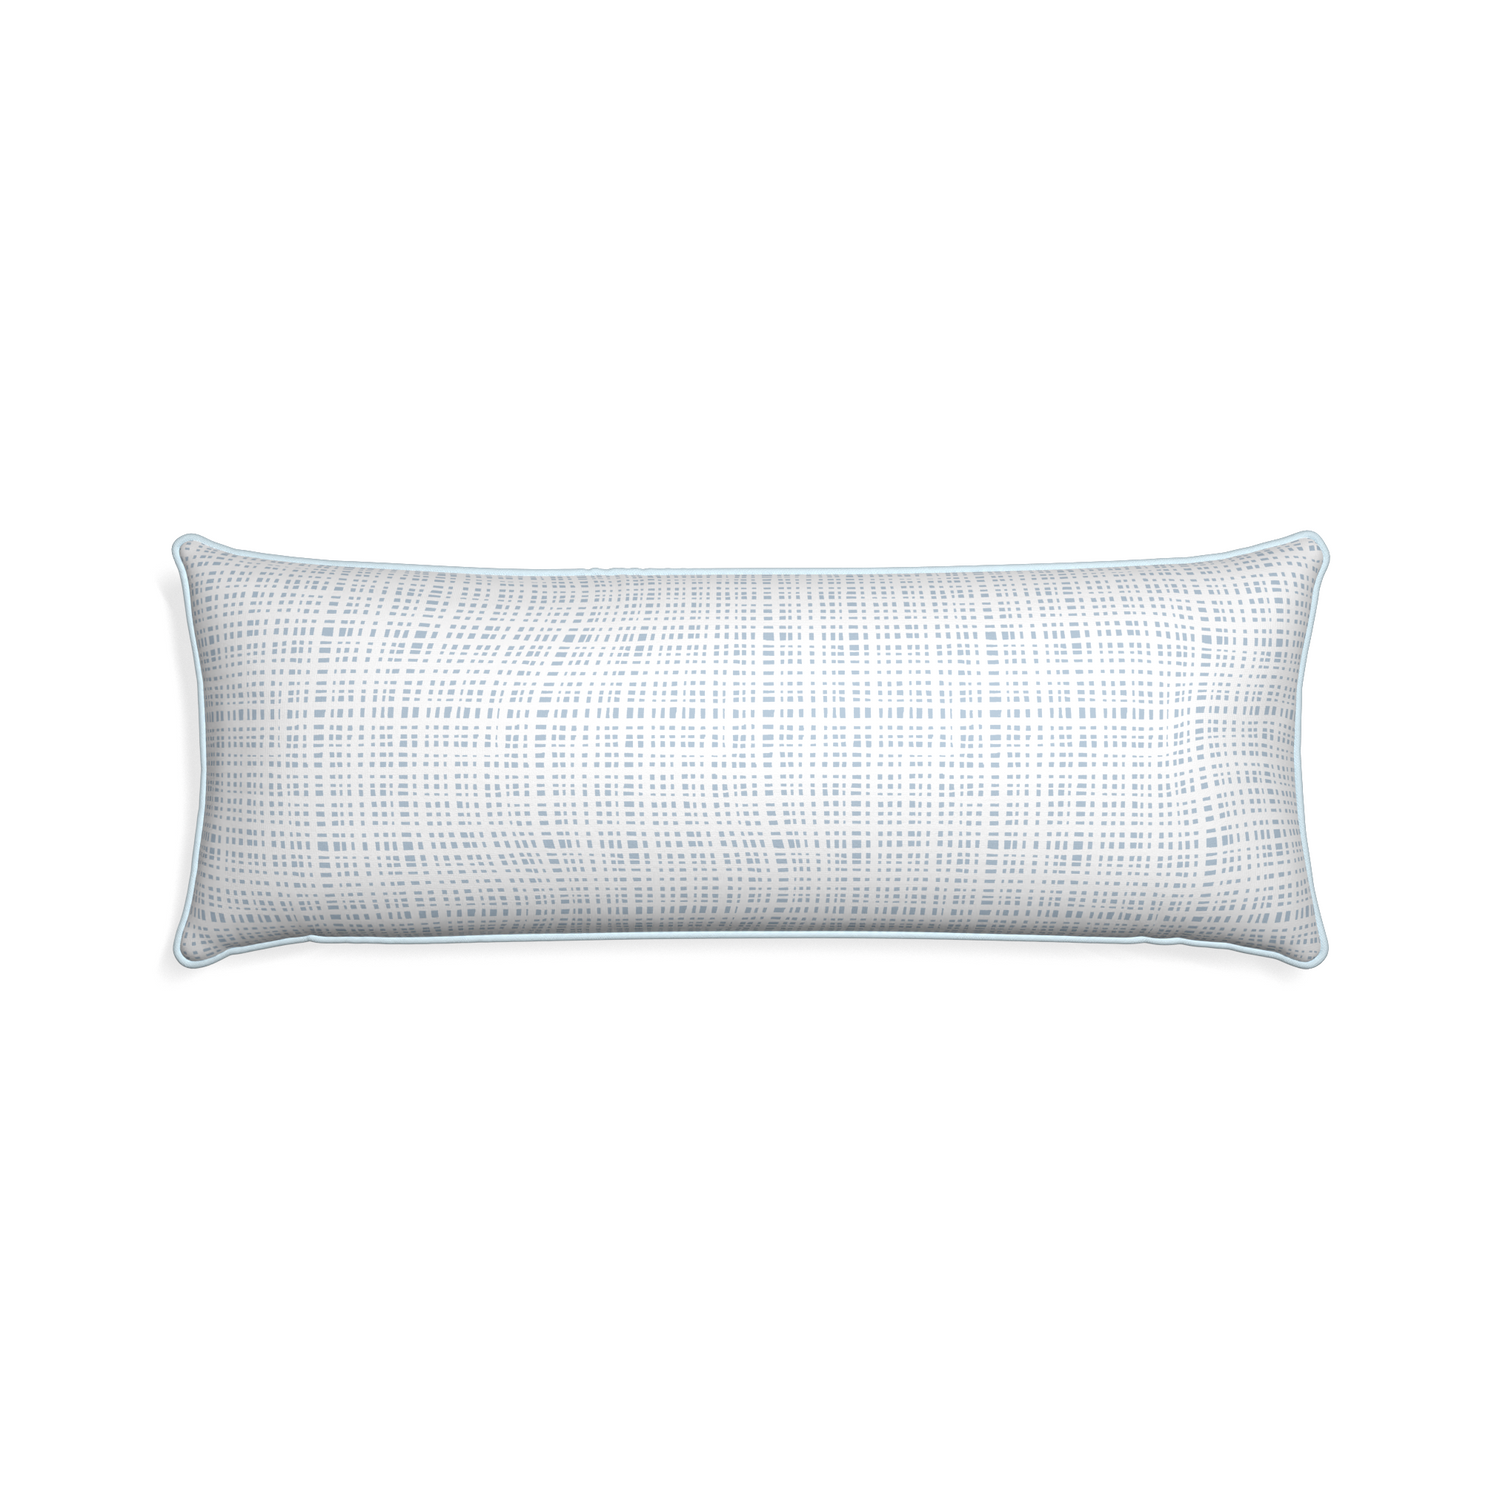 Xl-lumbar ginger custom plaid sky bluepillow with powder piping on white background